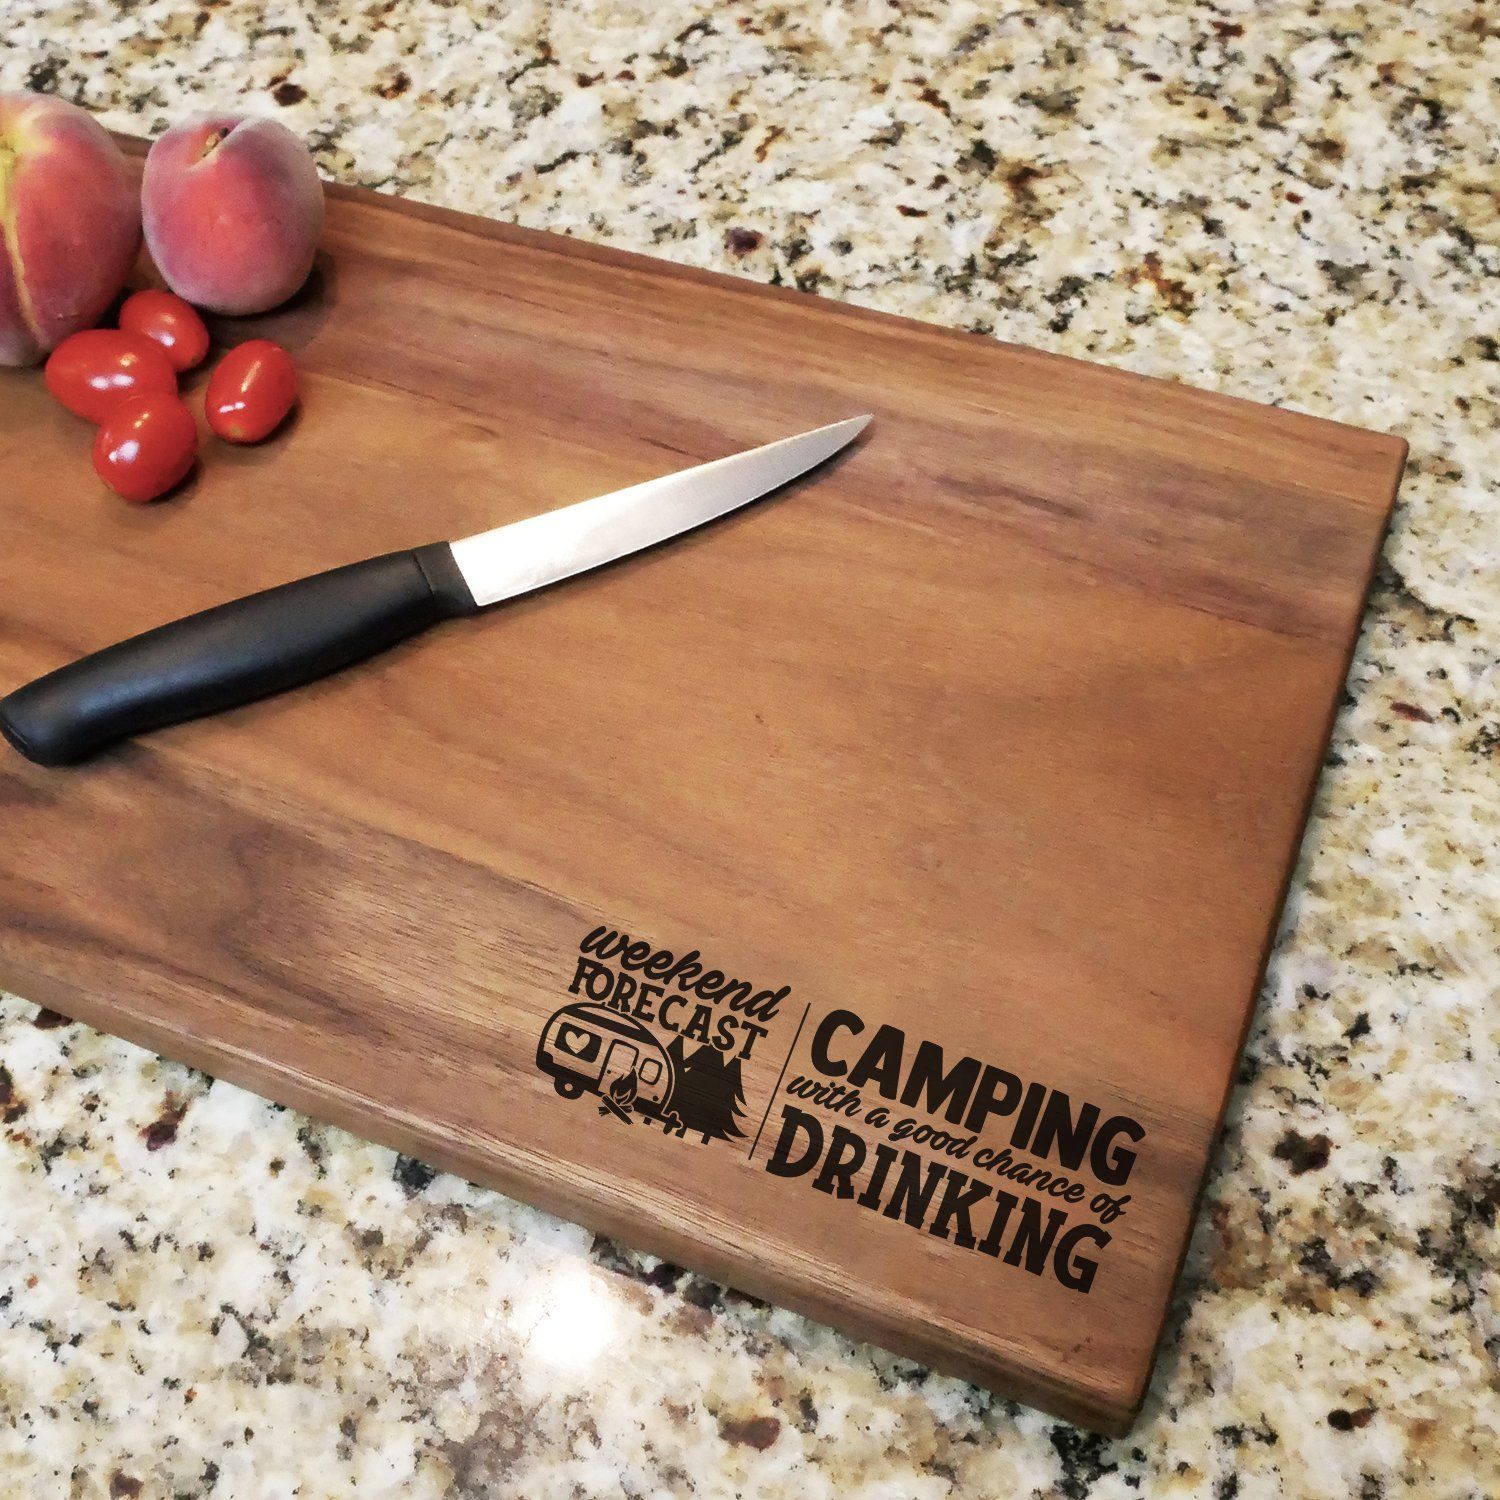 The 10 Best Cutting Boards for Cooking, Camping and Entertaining